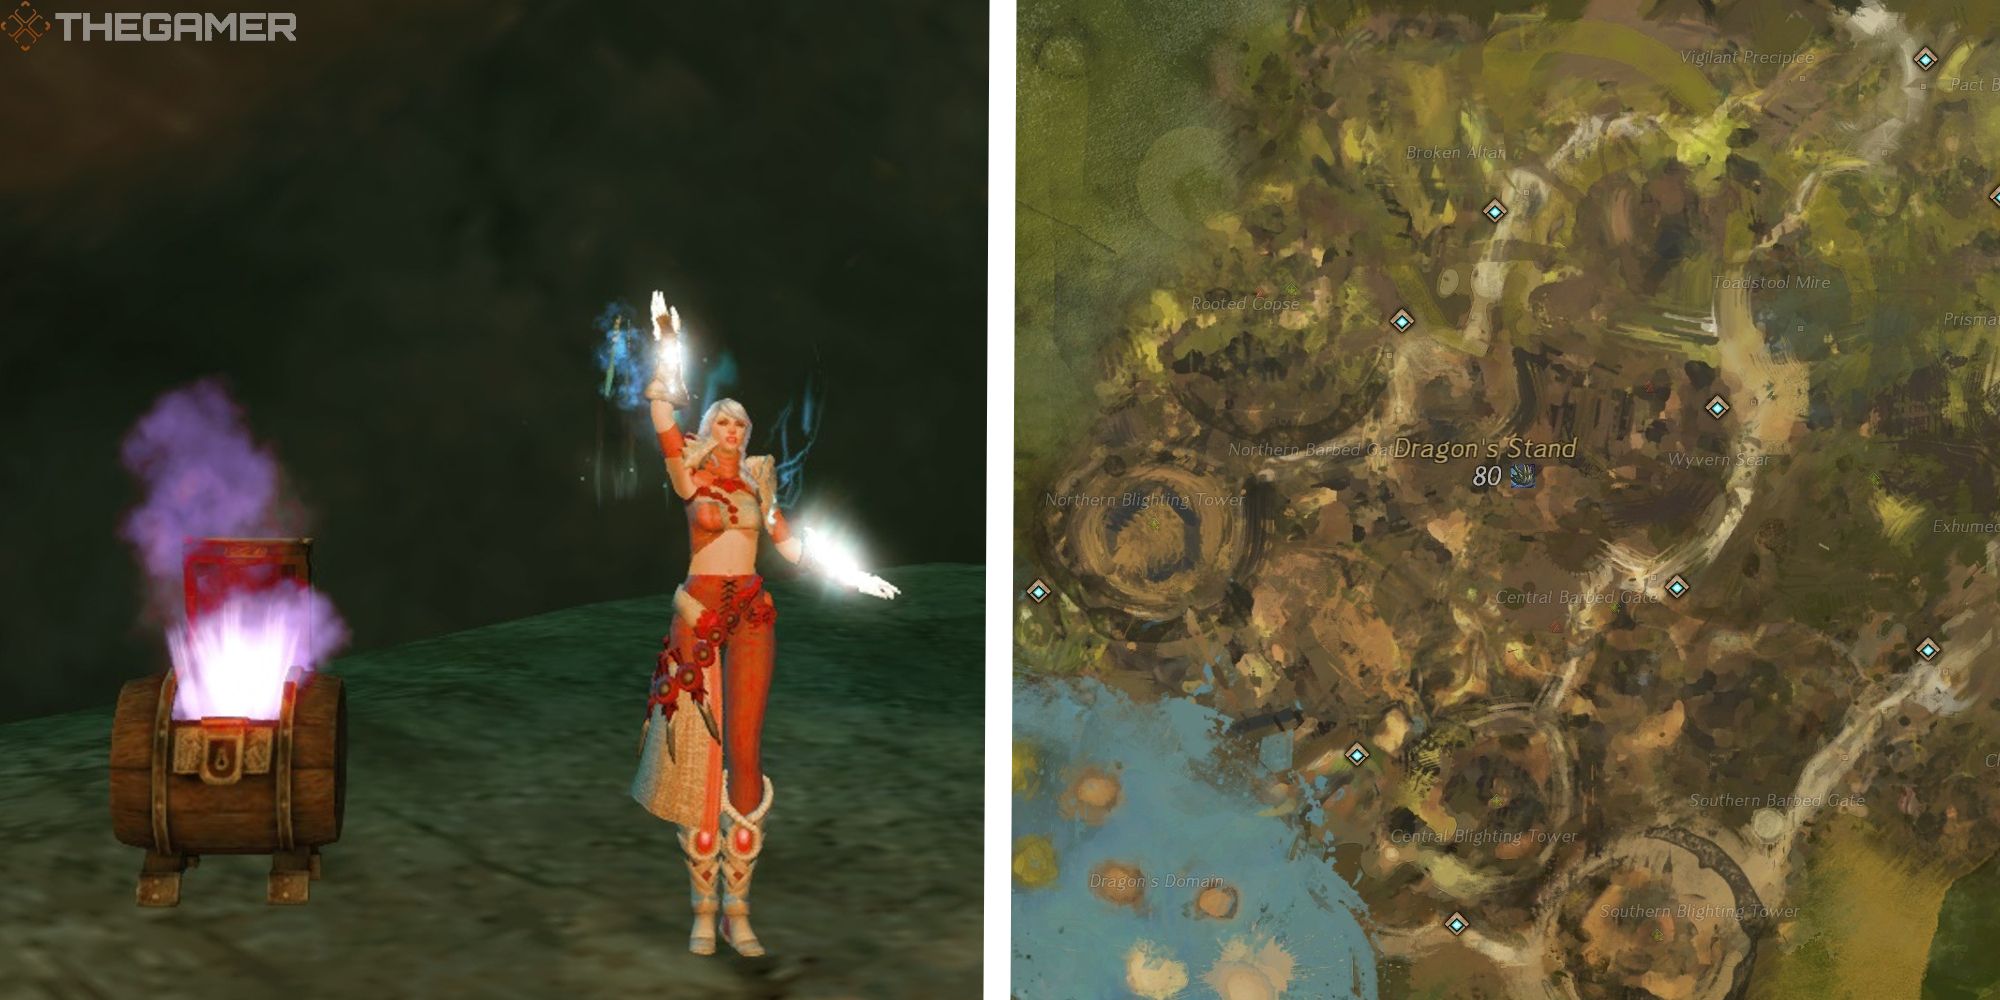 image of player waving next to a strongbox next to image of dragons stand map